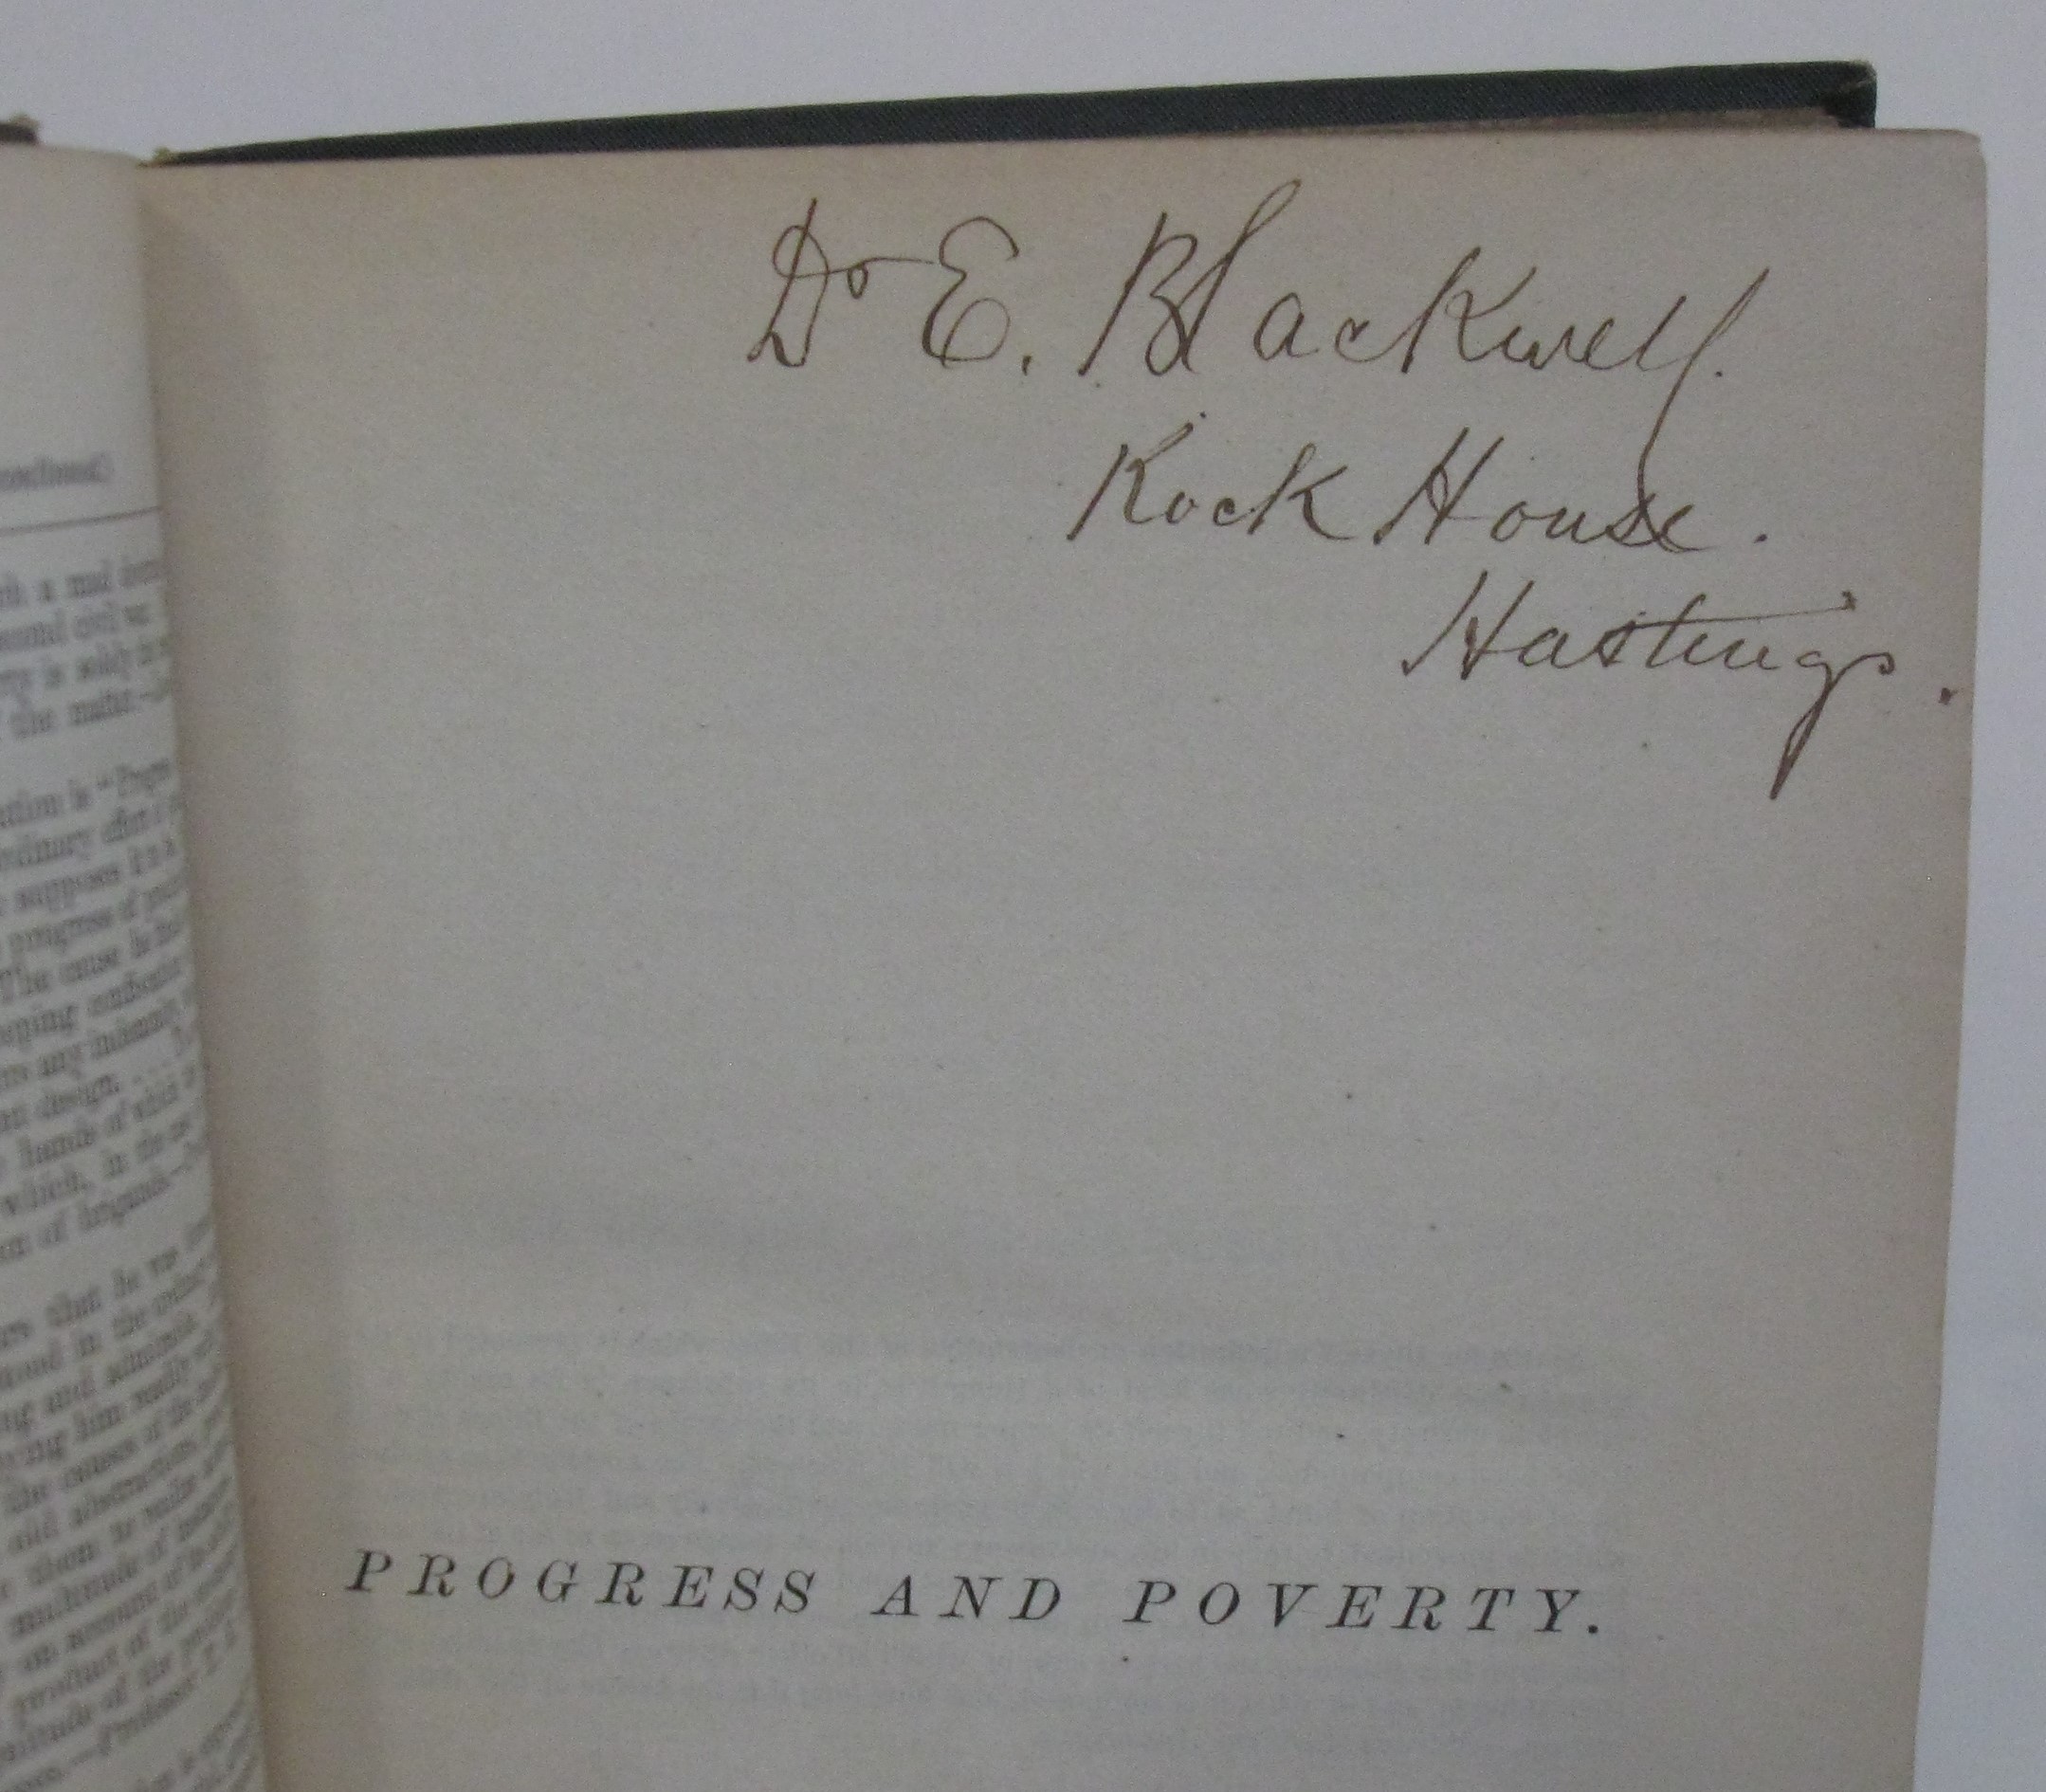 Elizabeth Blackwell’s copy of Henry George’s Progress and Poverty